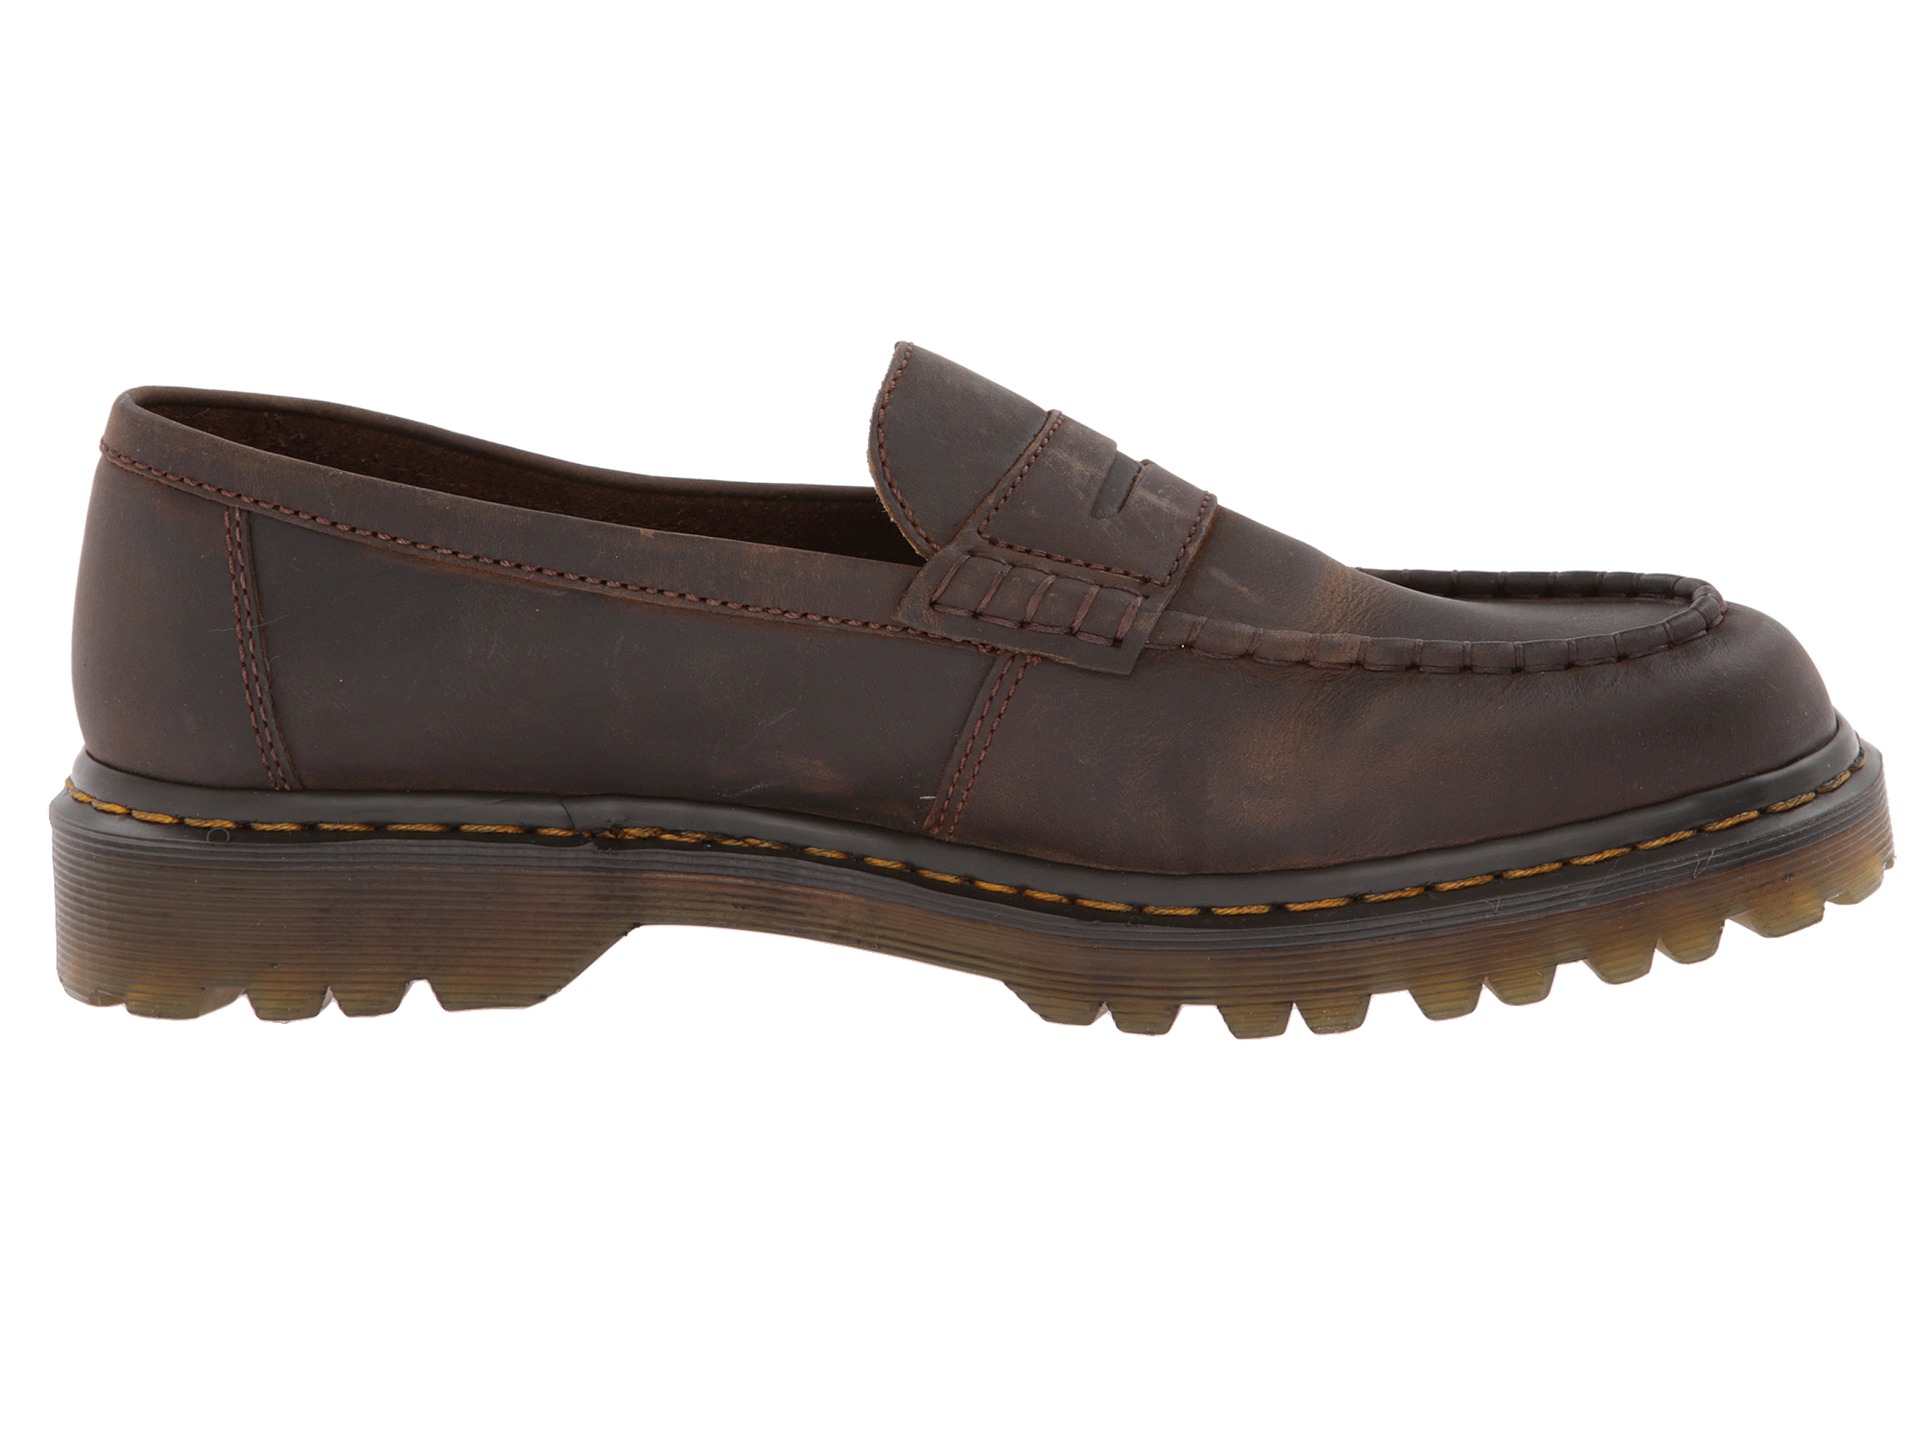 Dr Martens Mabbott Penny Loafer Aztec Rugged Crazy Horse | Shipped Free ...